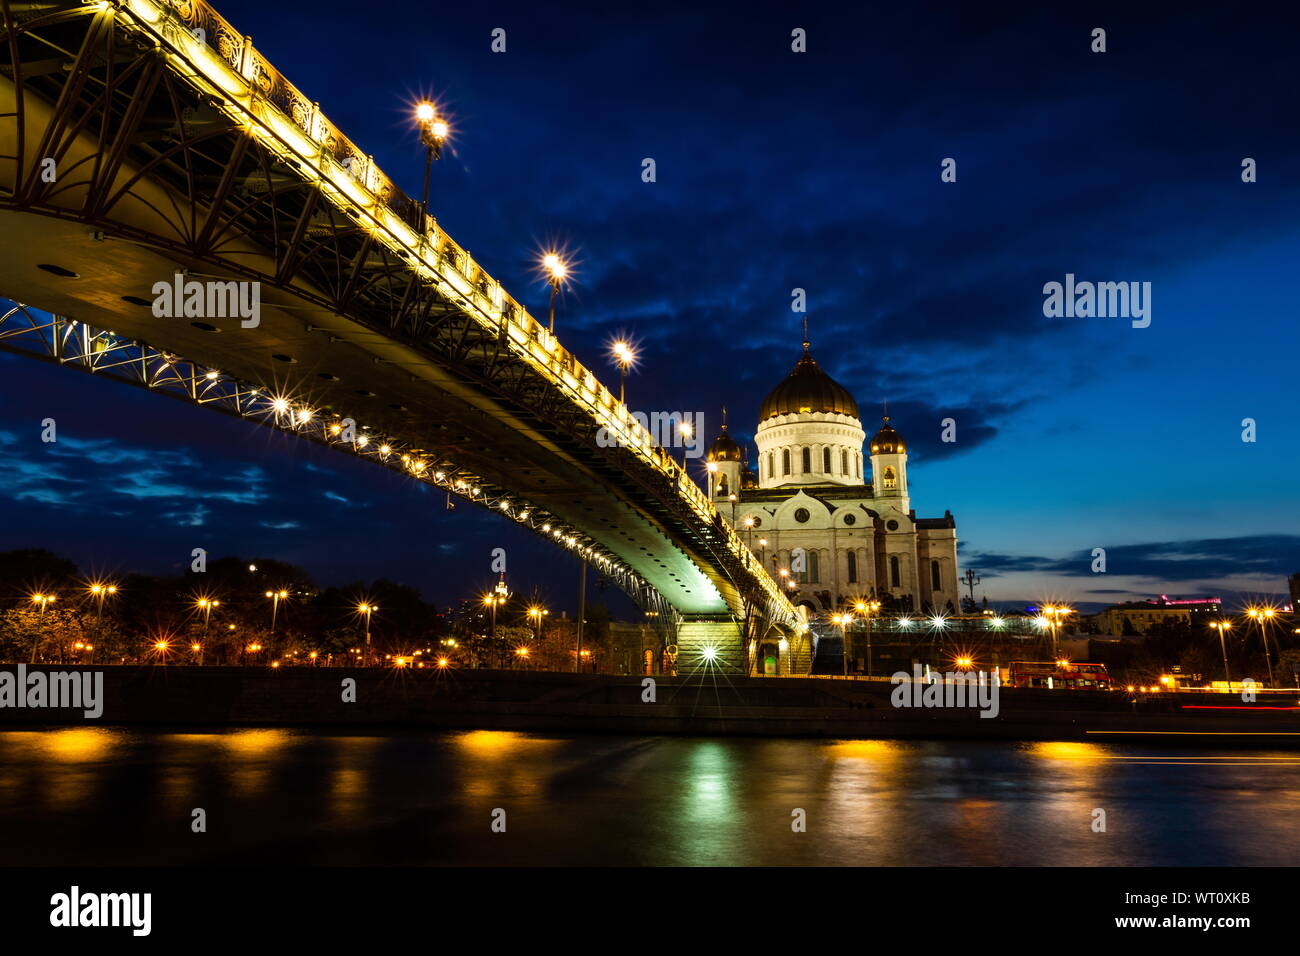 Illuminated Cathedral of Christ the Savior framed with old style street lights of Patriarchy Bridge at night. Stock Photo